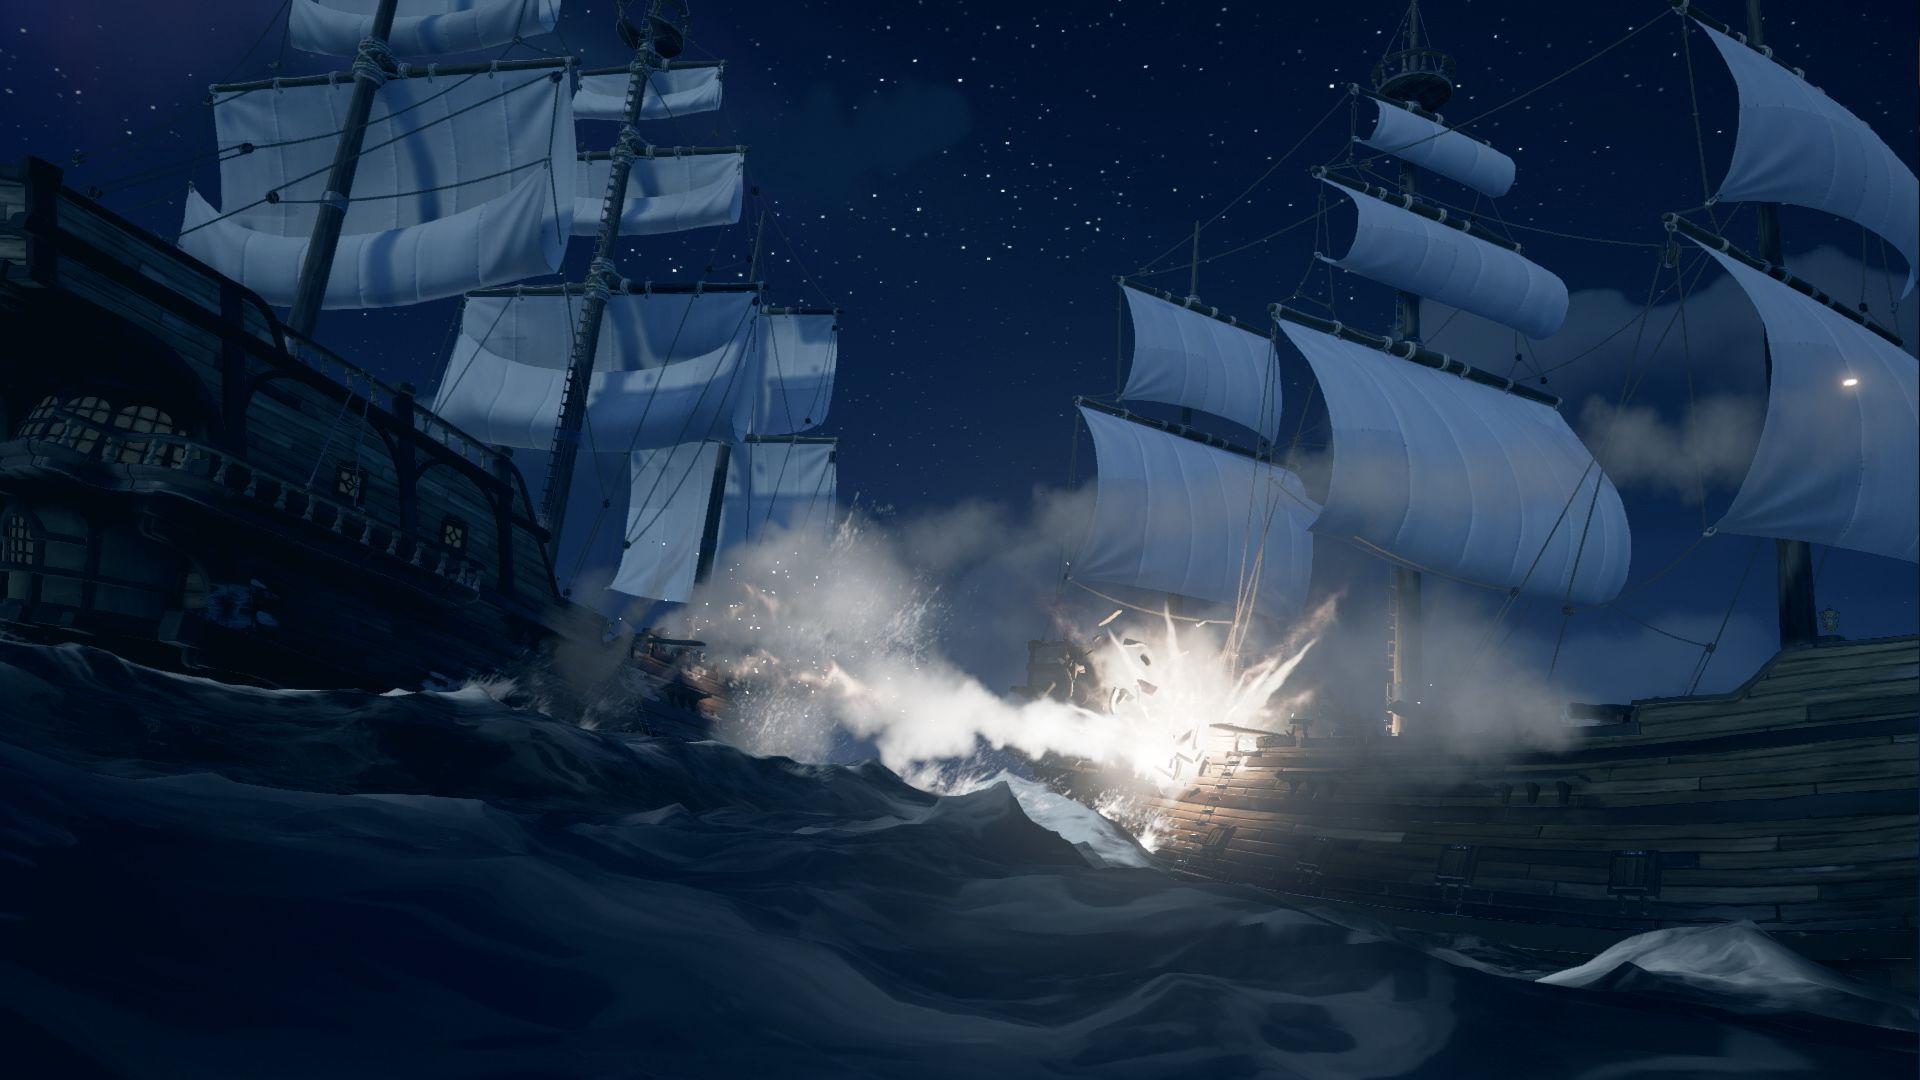 Sea of Thieves is all about the crew against the world